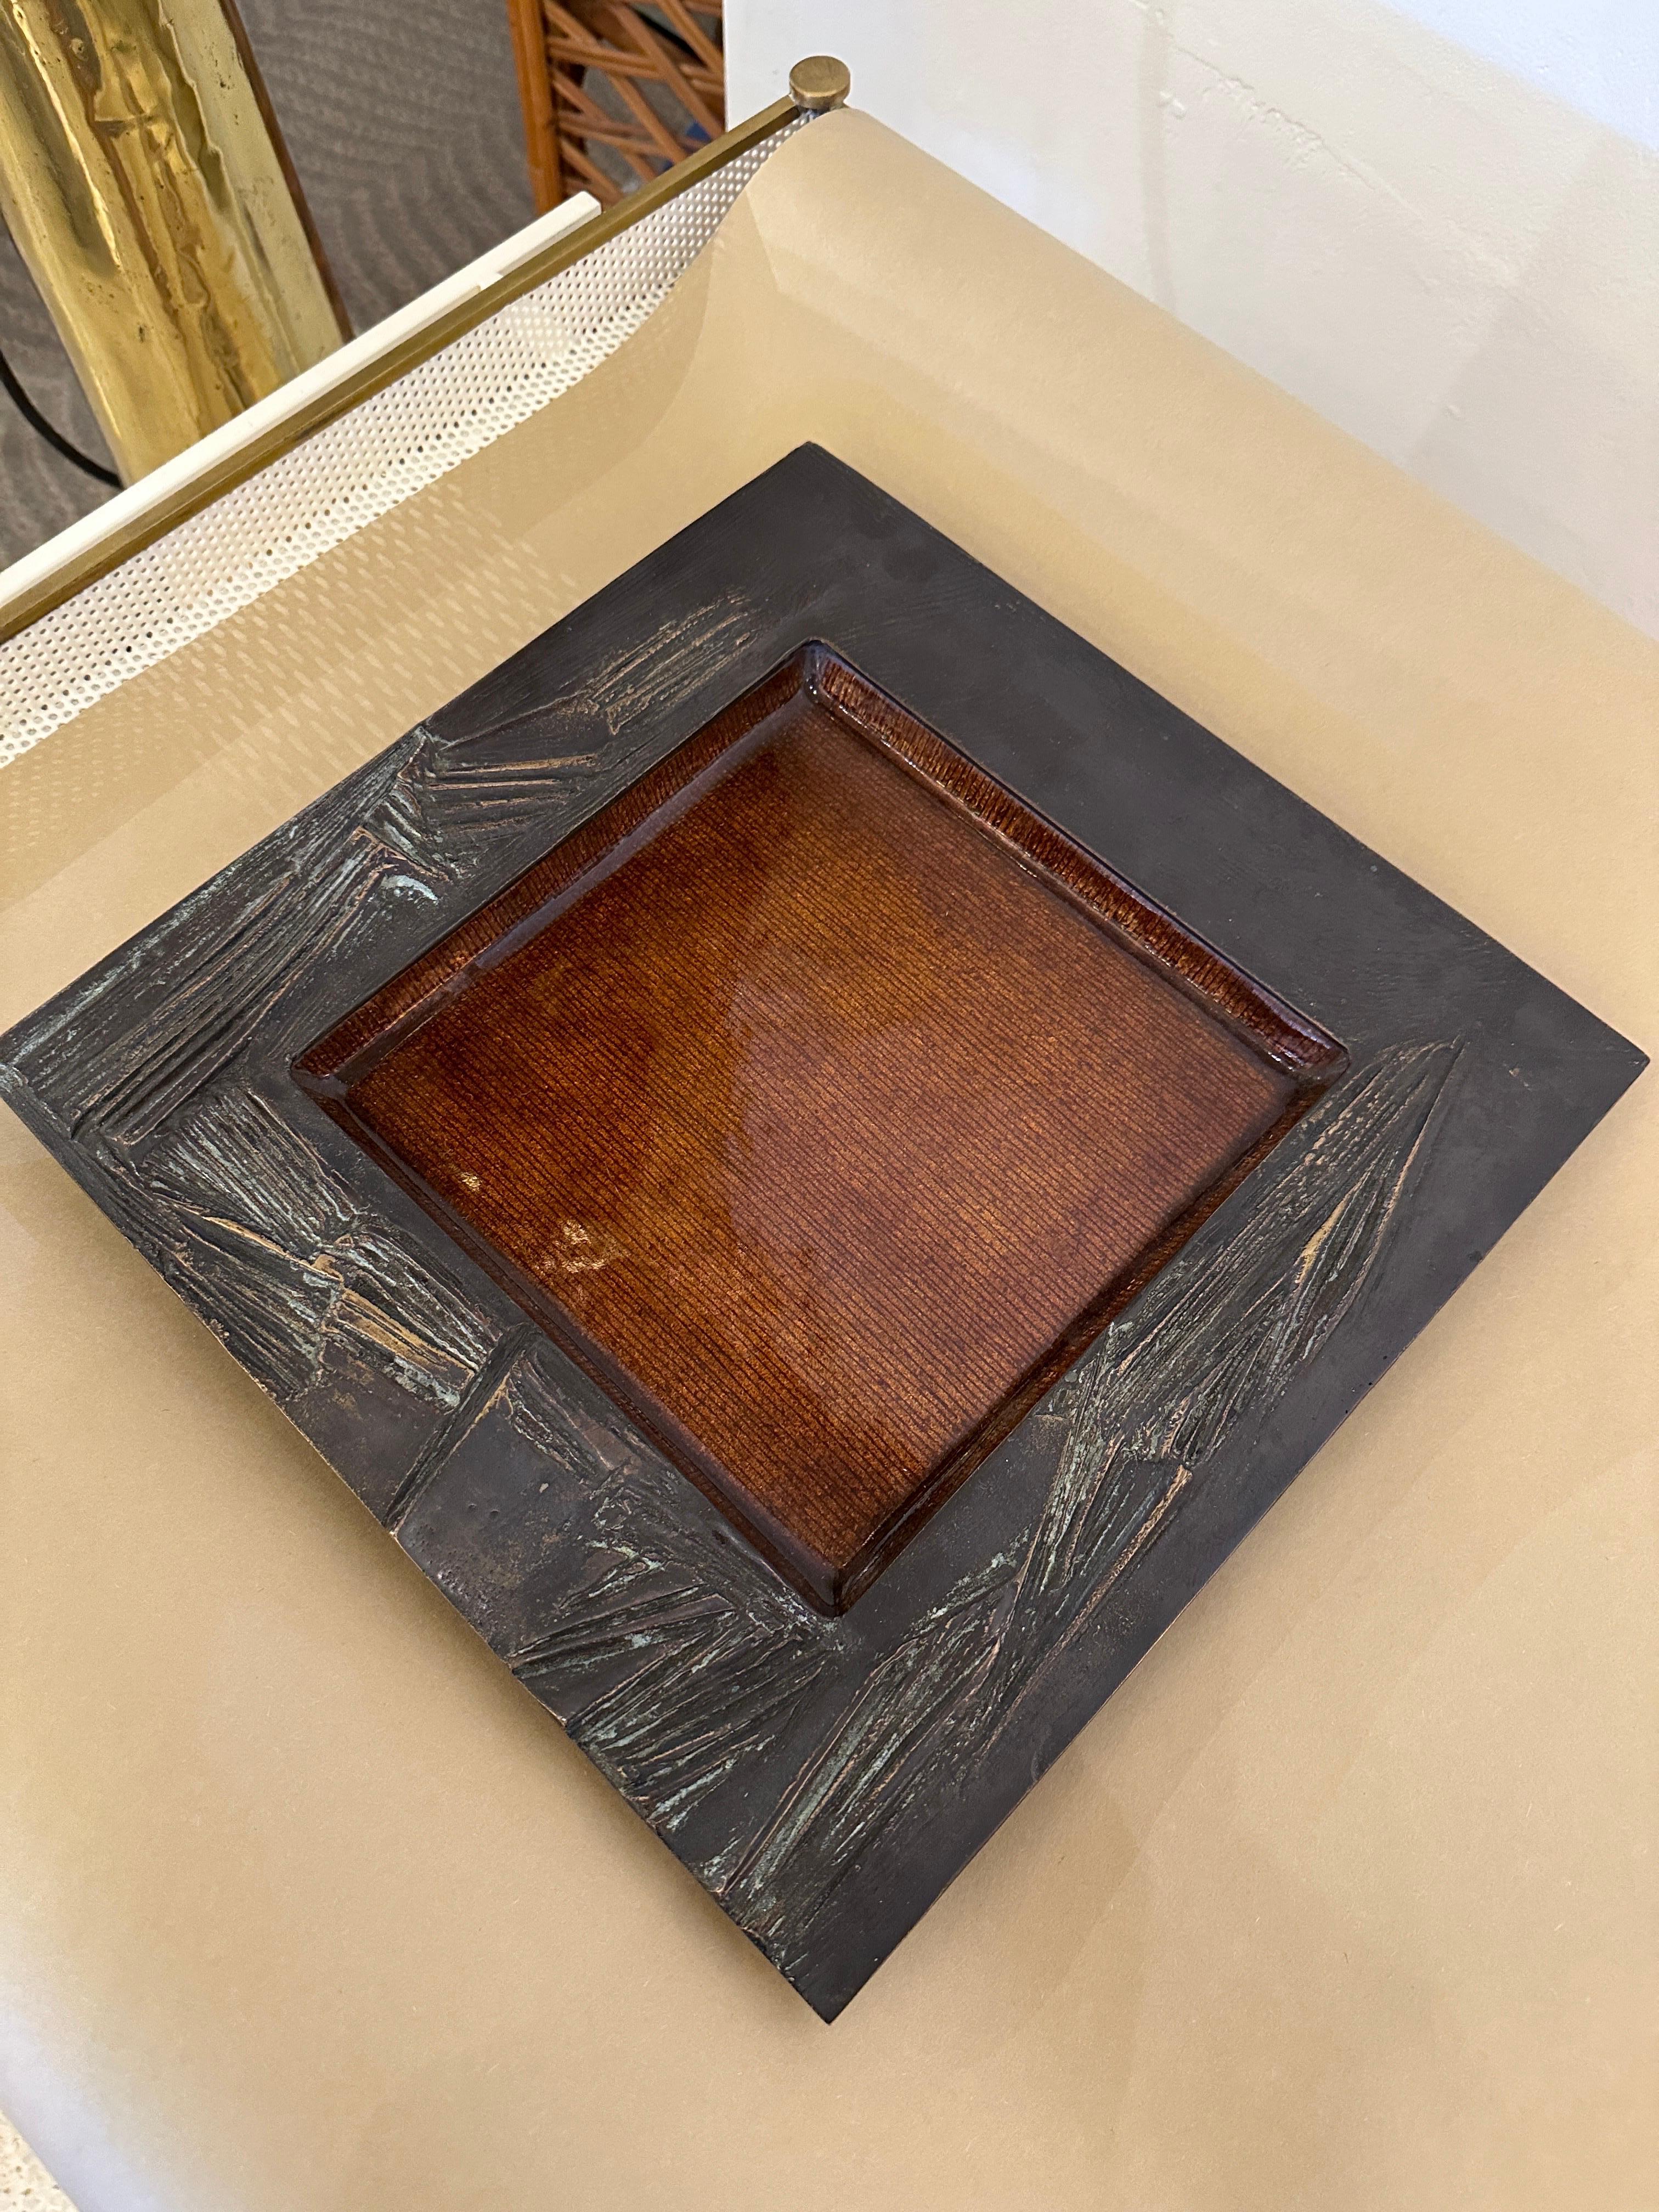 Bronze Modernist Large Square Bowl Sculpture, Signed Del Campo - Italy For Sale 4